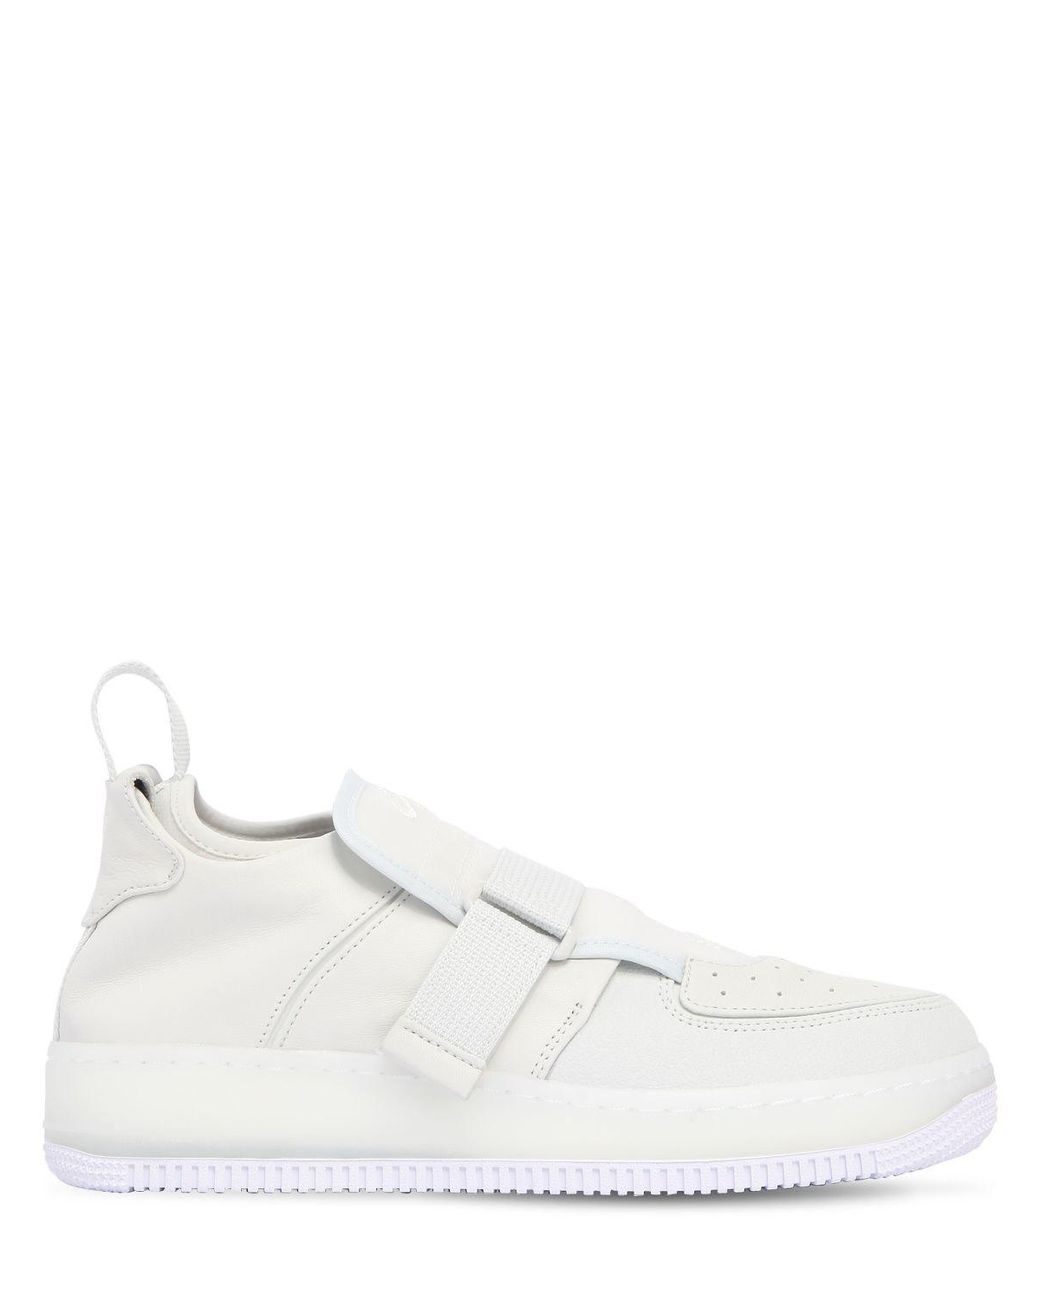 Nike Air Force 1 Explorer Xx Sneakers in White | Lyst